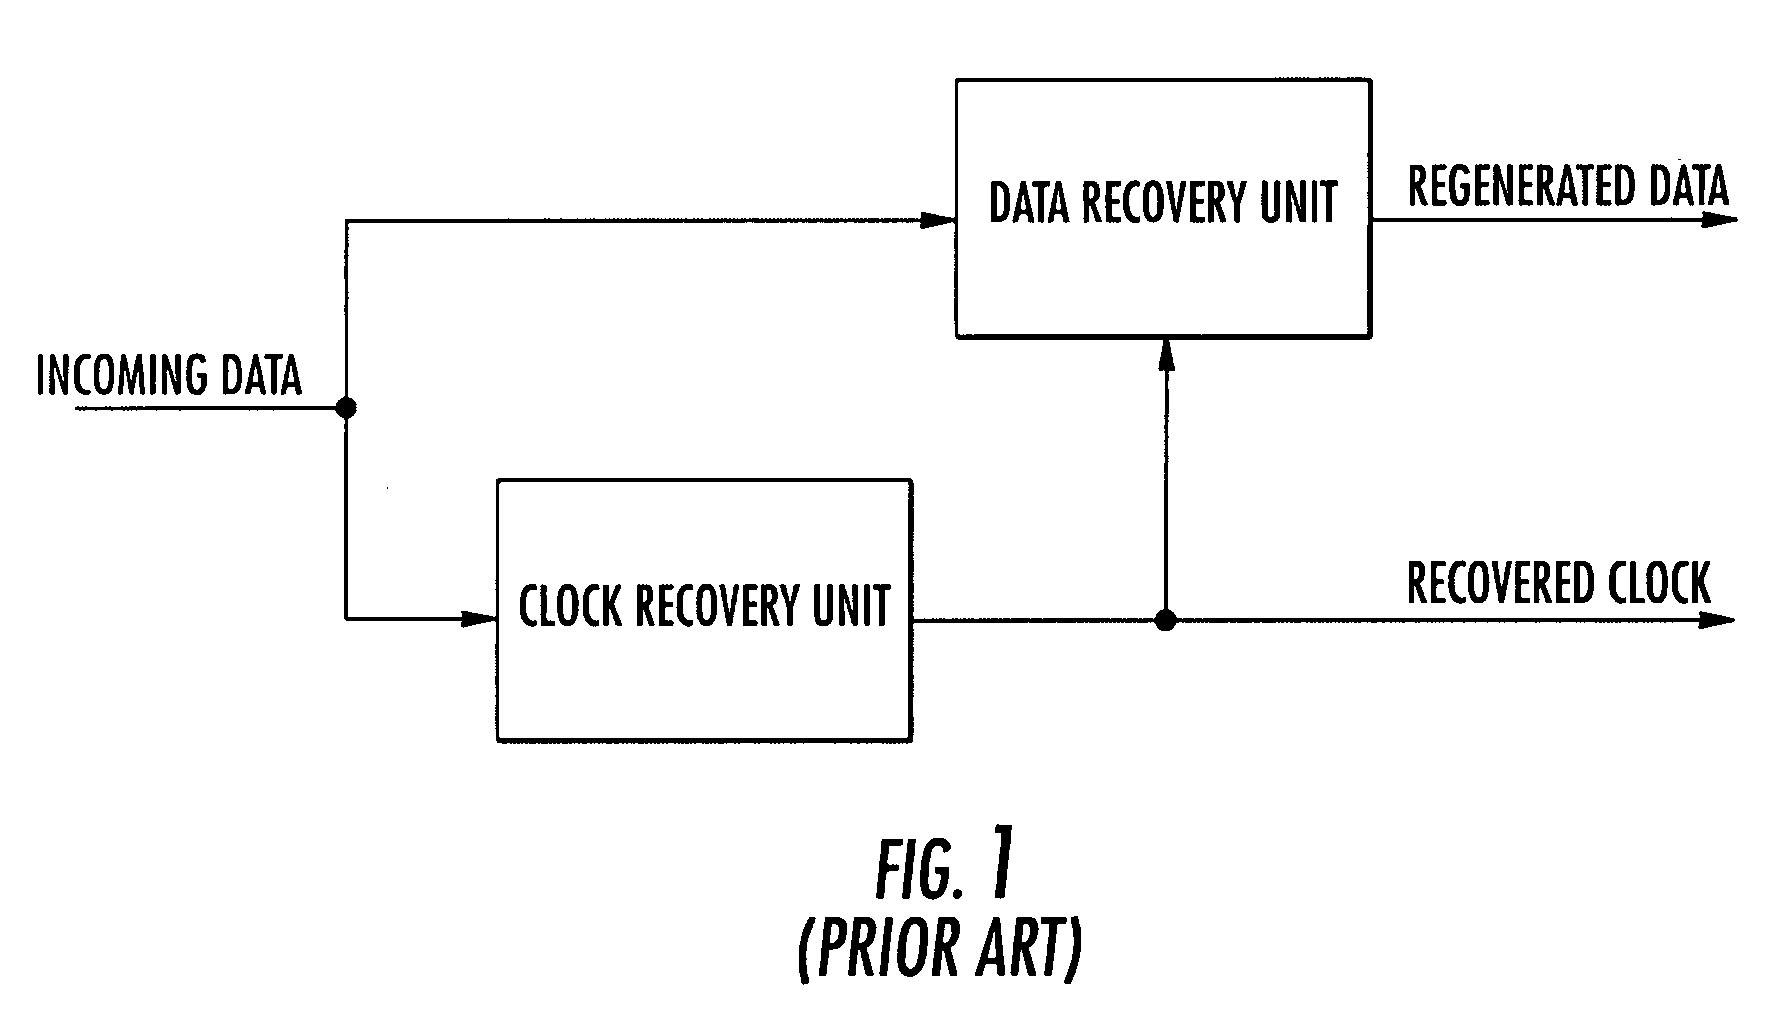 Feed forward clock and data recovery unit